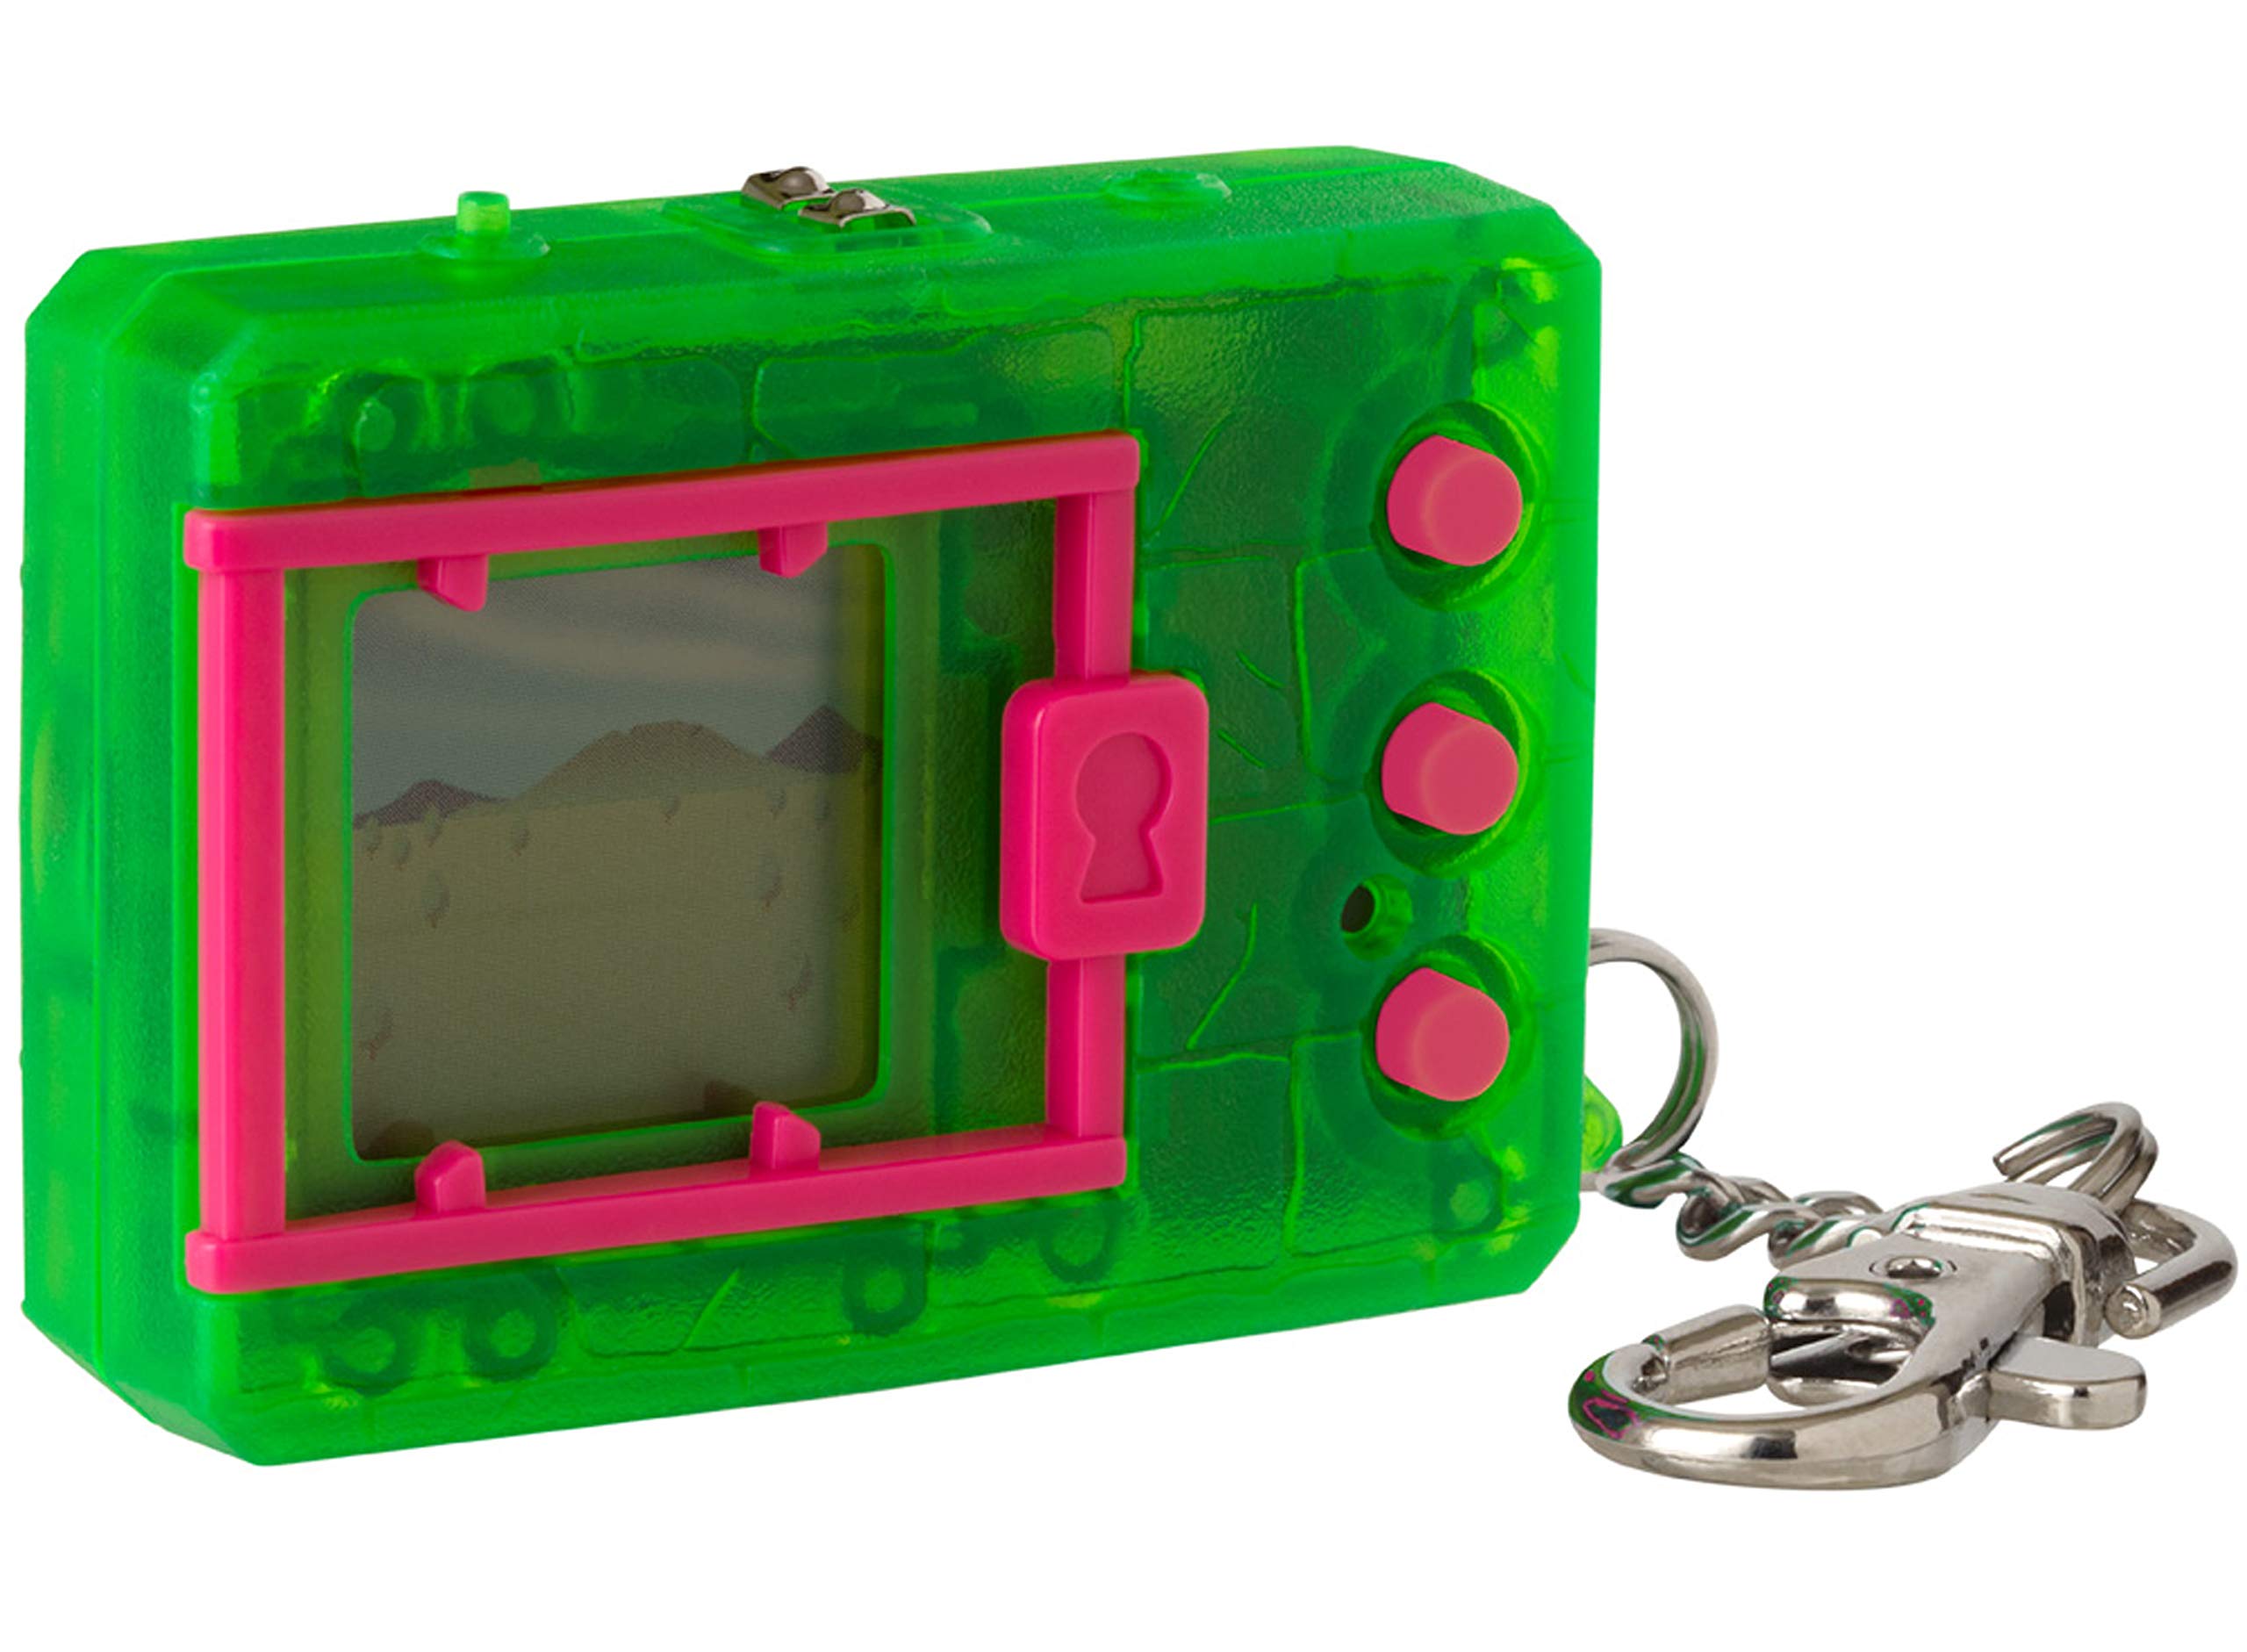 Digimon Bandai Original Digivice Virtual Pet Monster (Neon Green) $6.30 + Free Shipping w/ Prime or on orders over $35